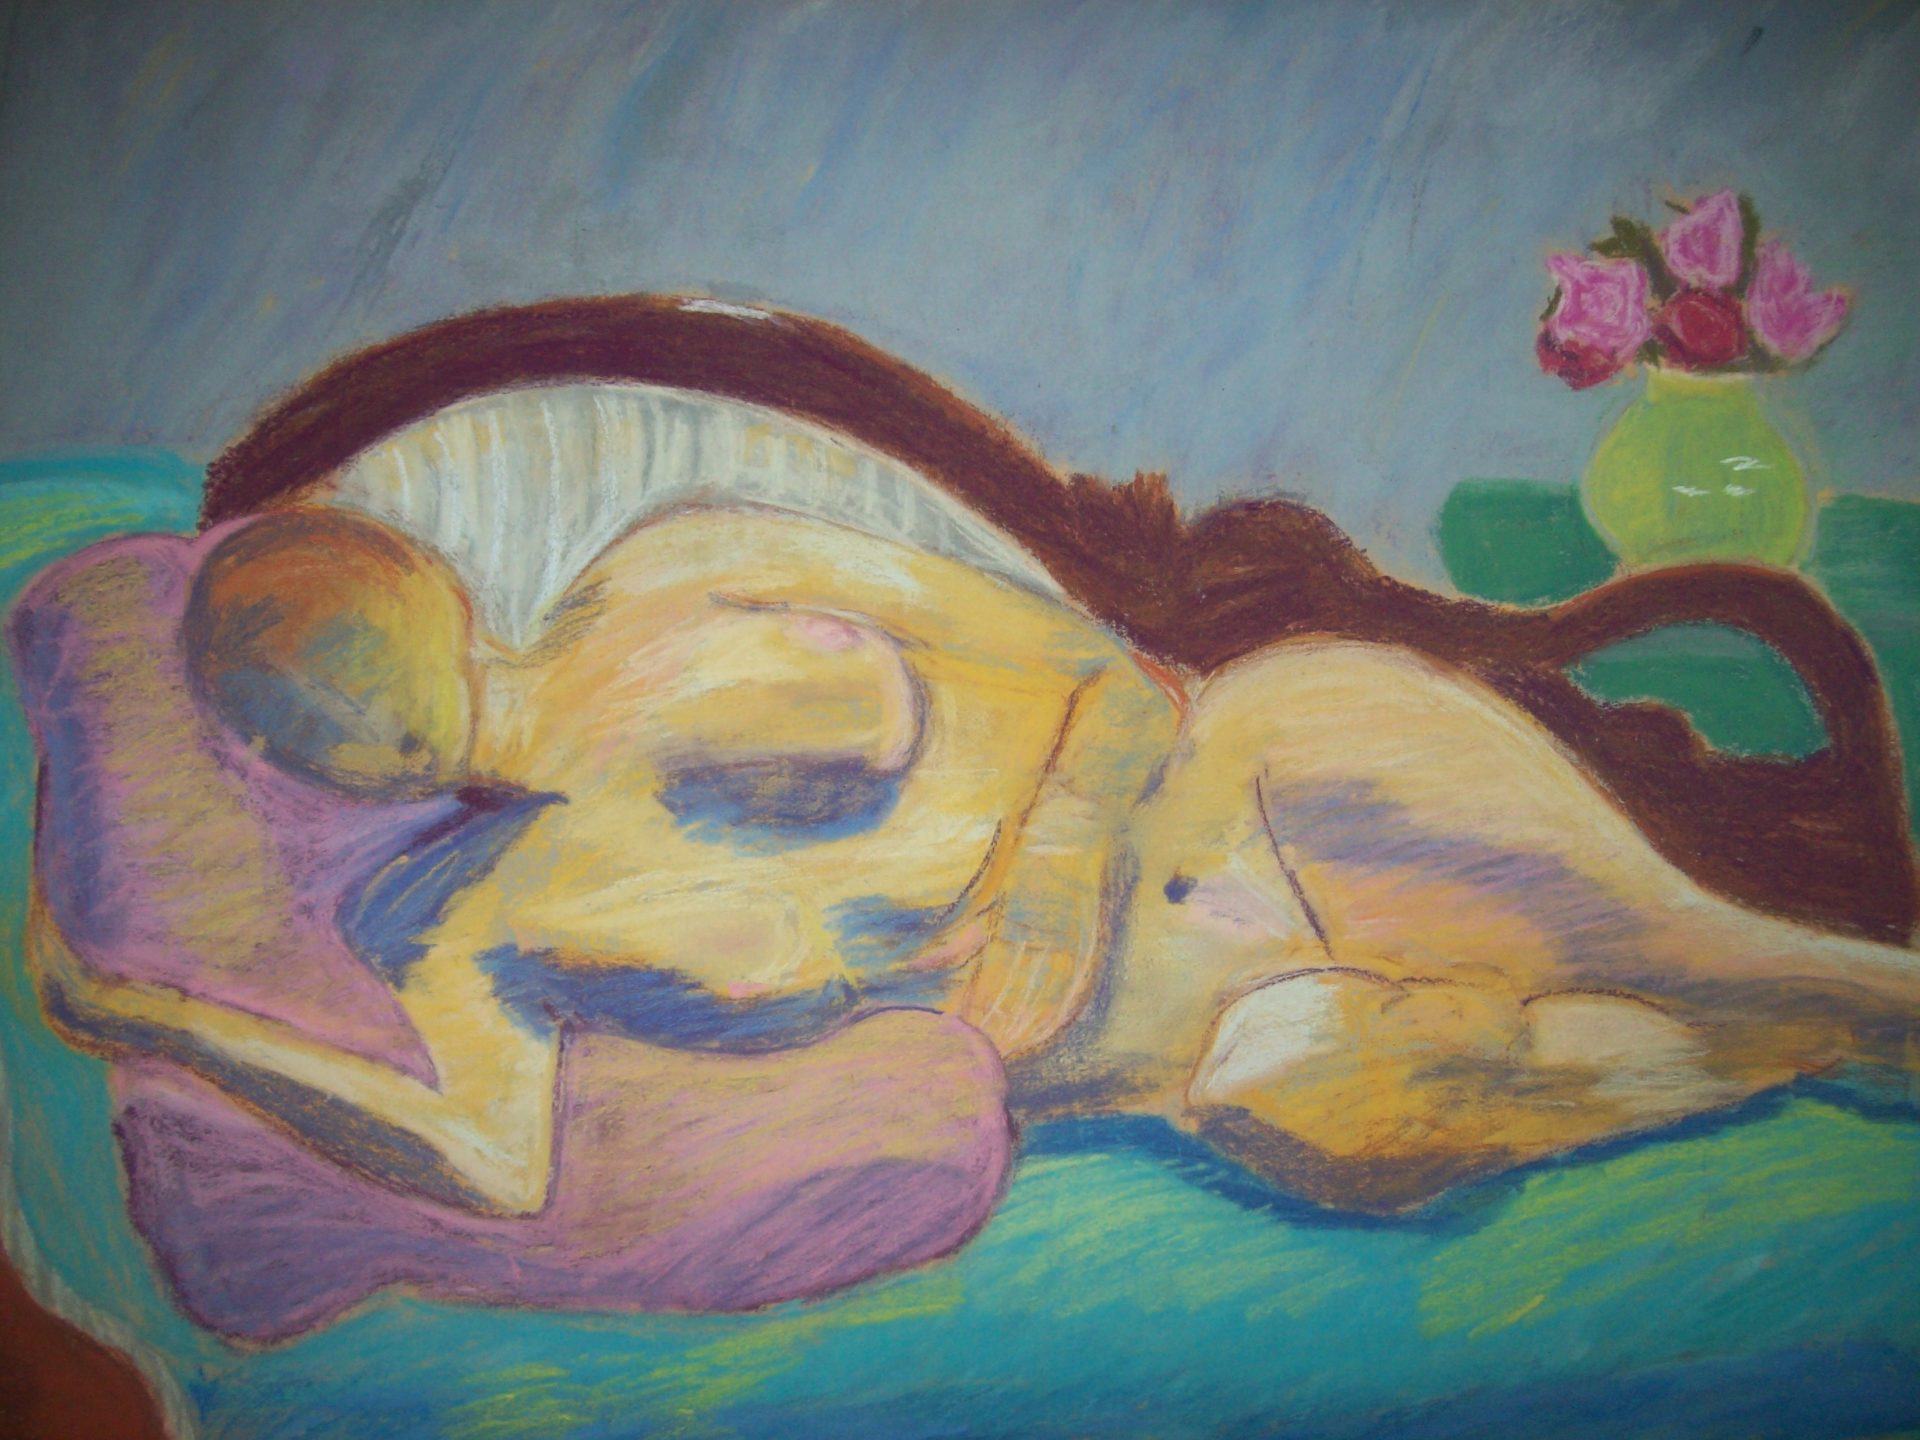 Reclining Woman with Roses